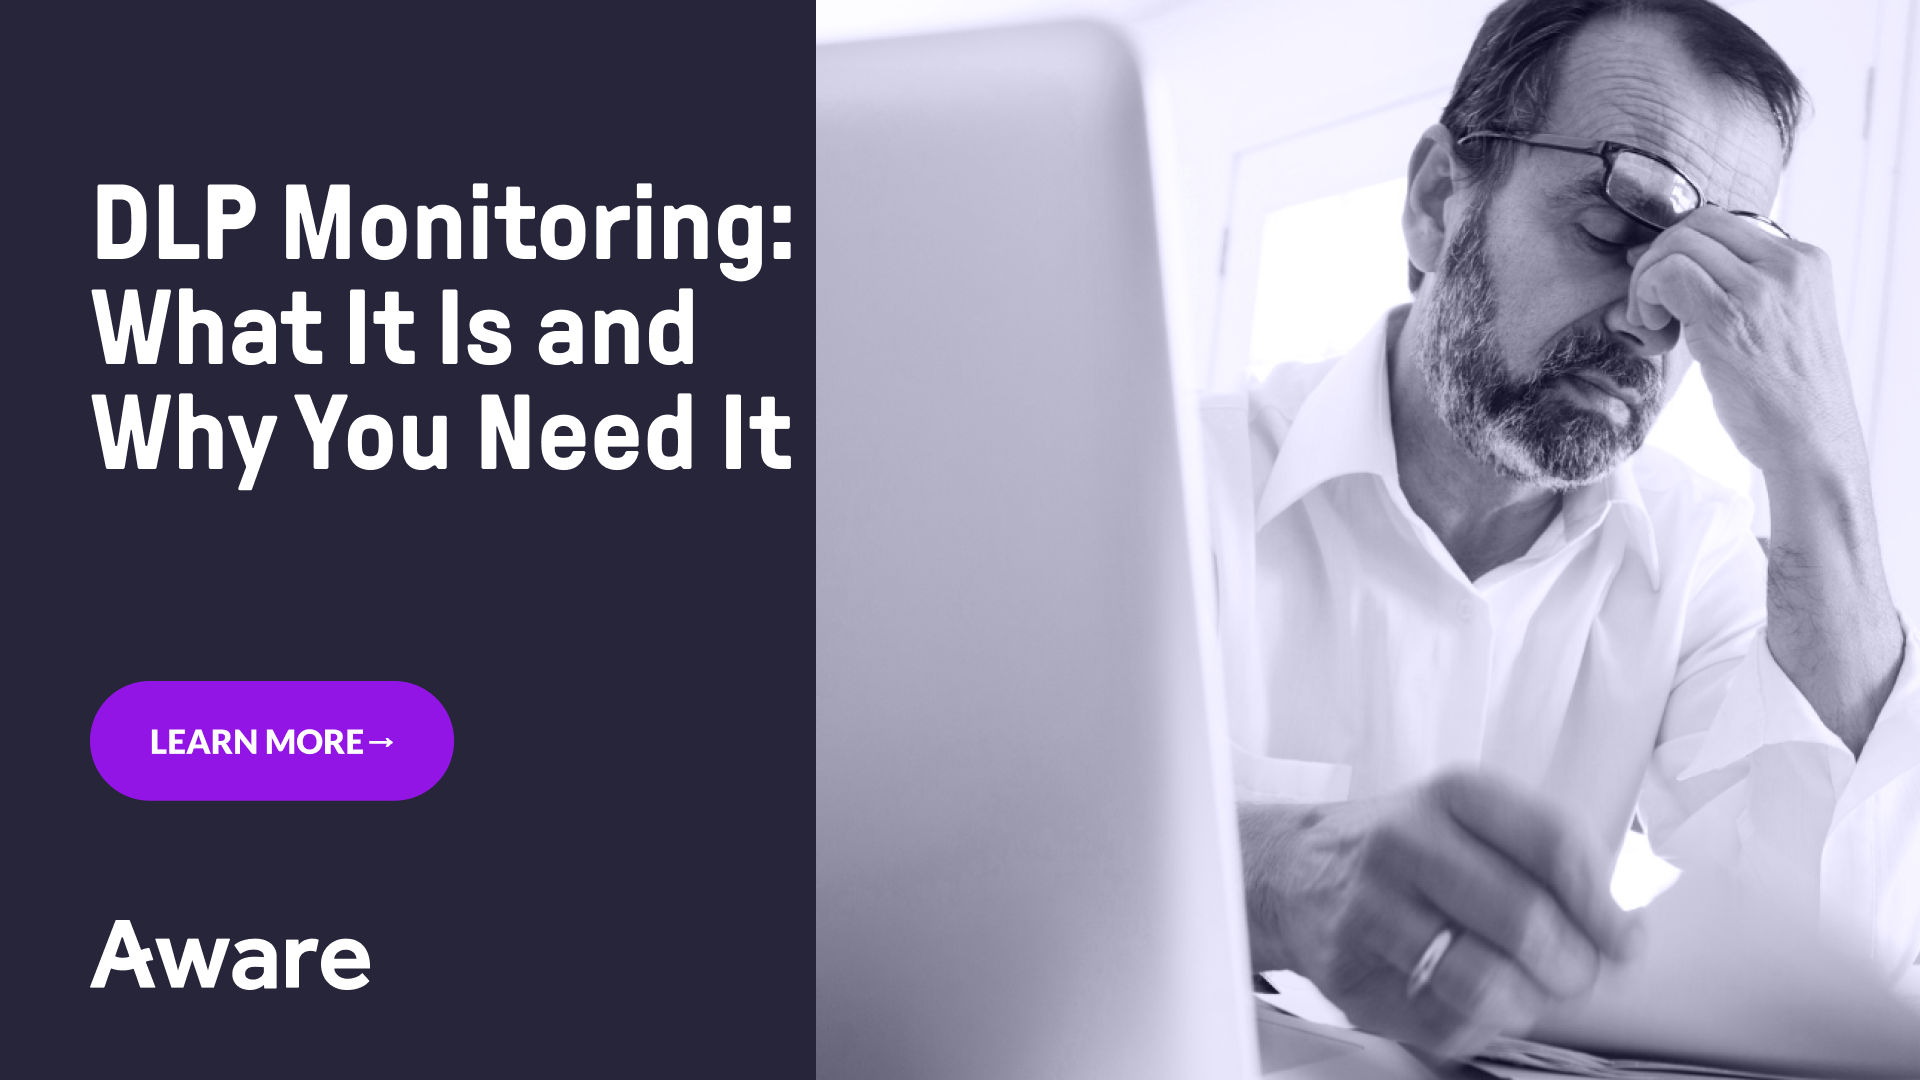 DLP Monitoring: What It Is and Why You Need It